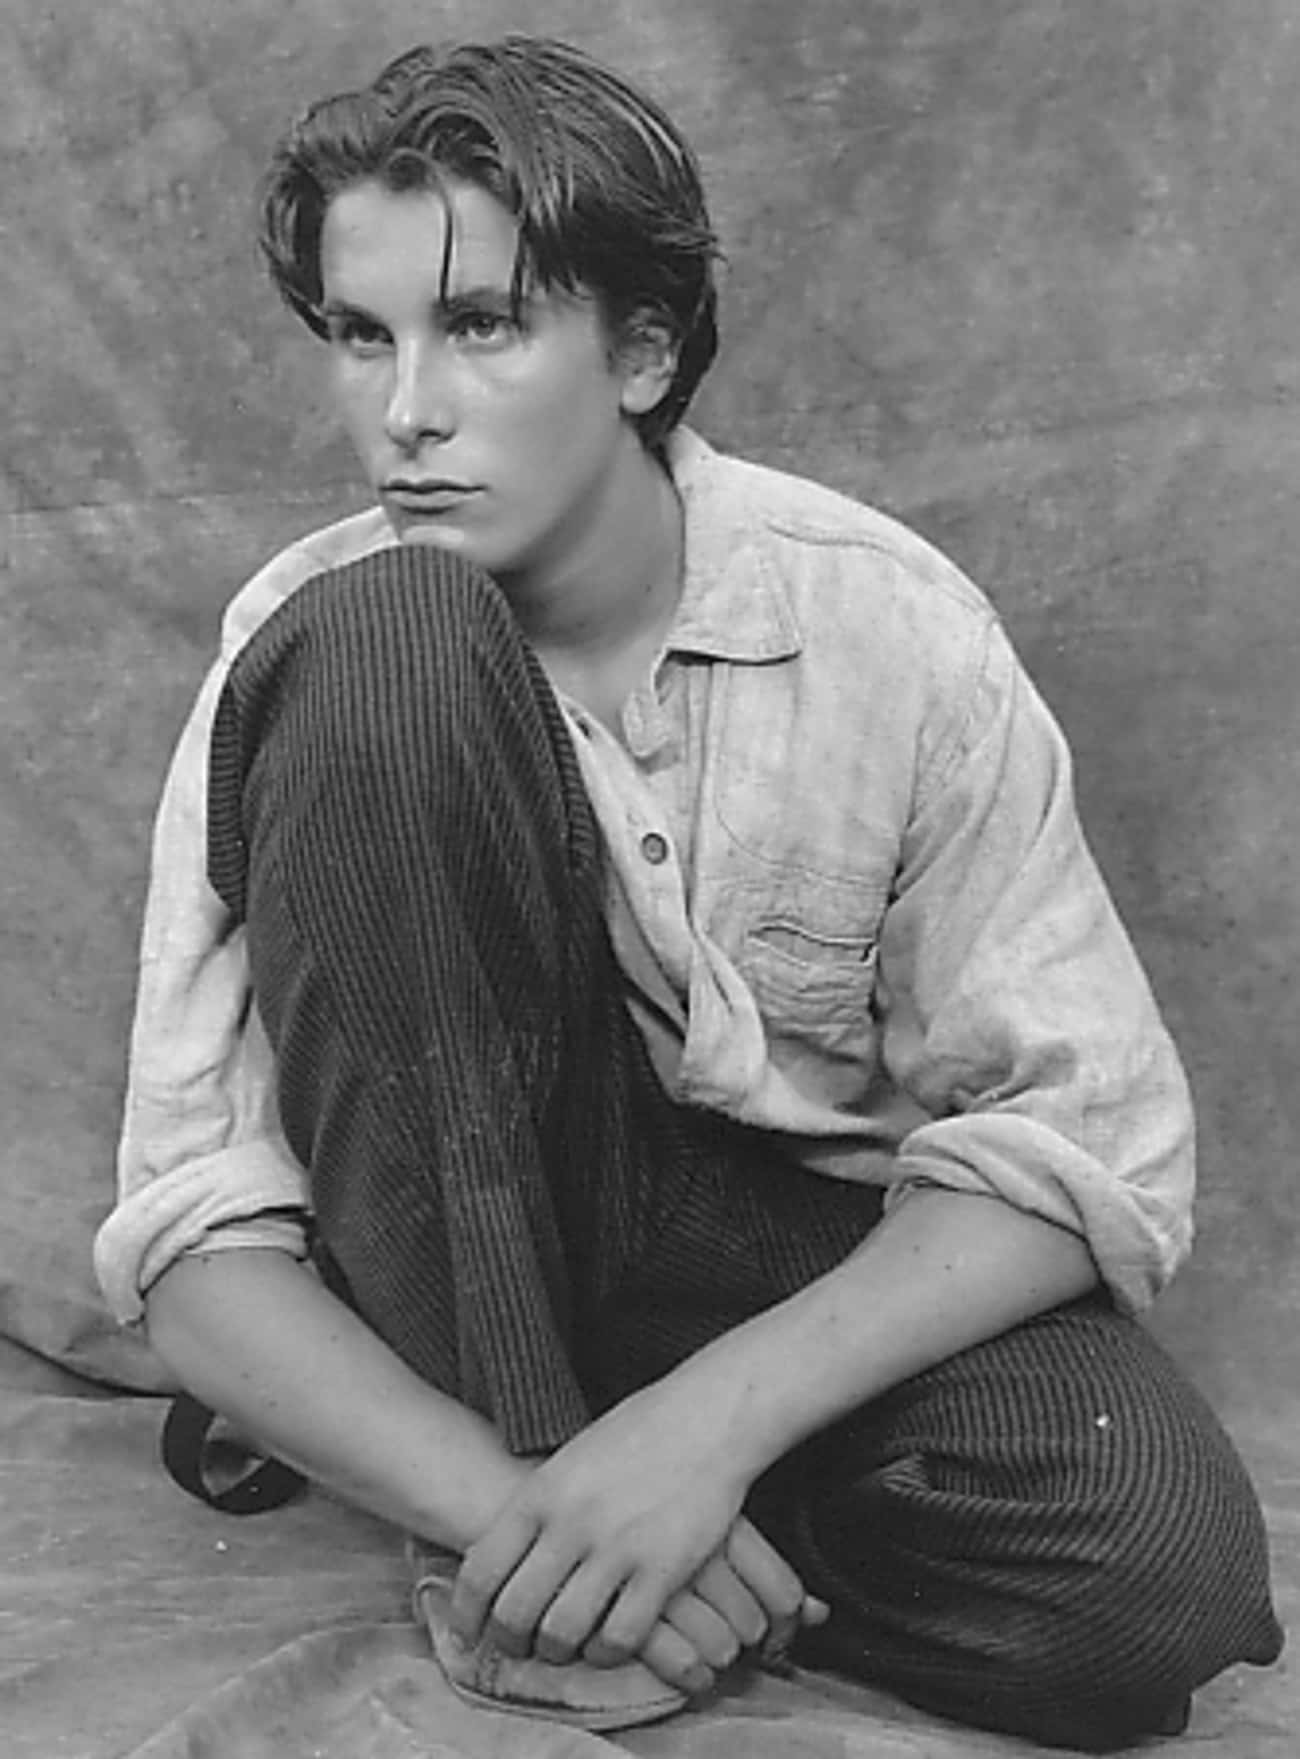 Young Christian Bale in Buttondown and Black and White Striped Pants